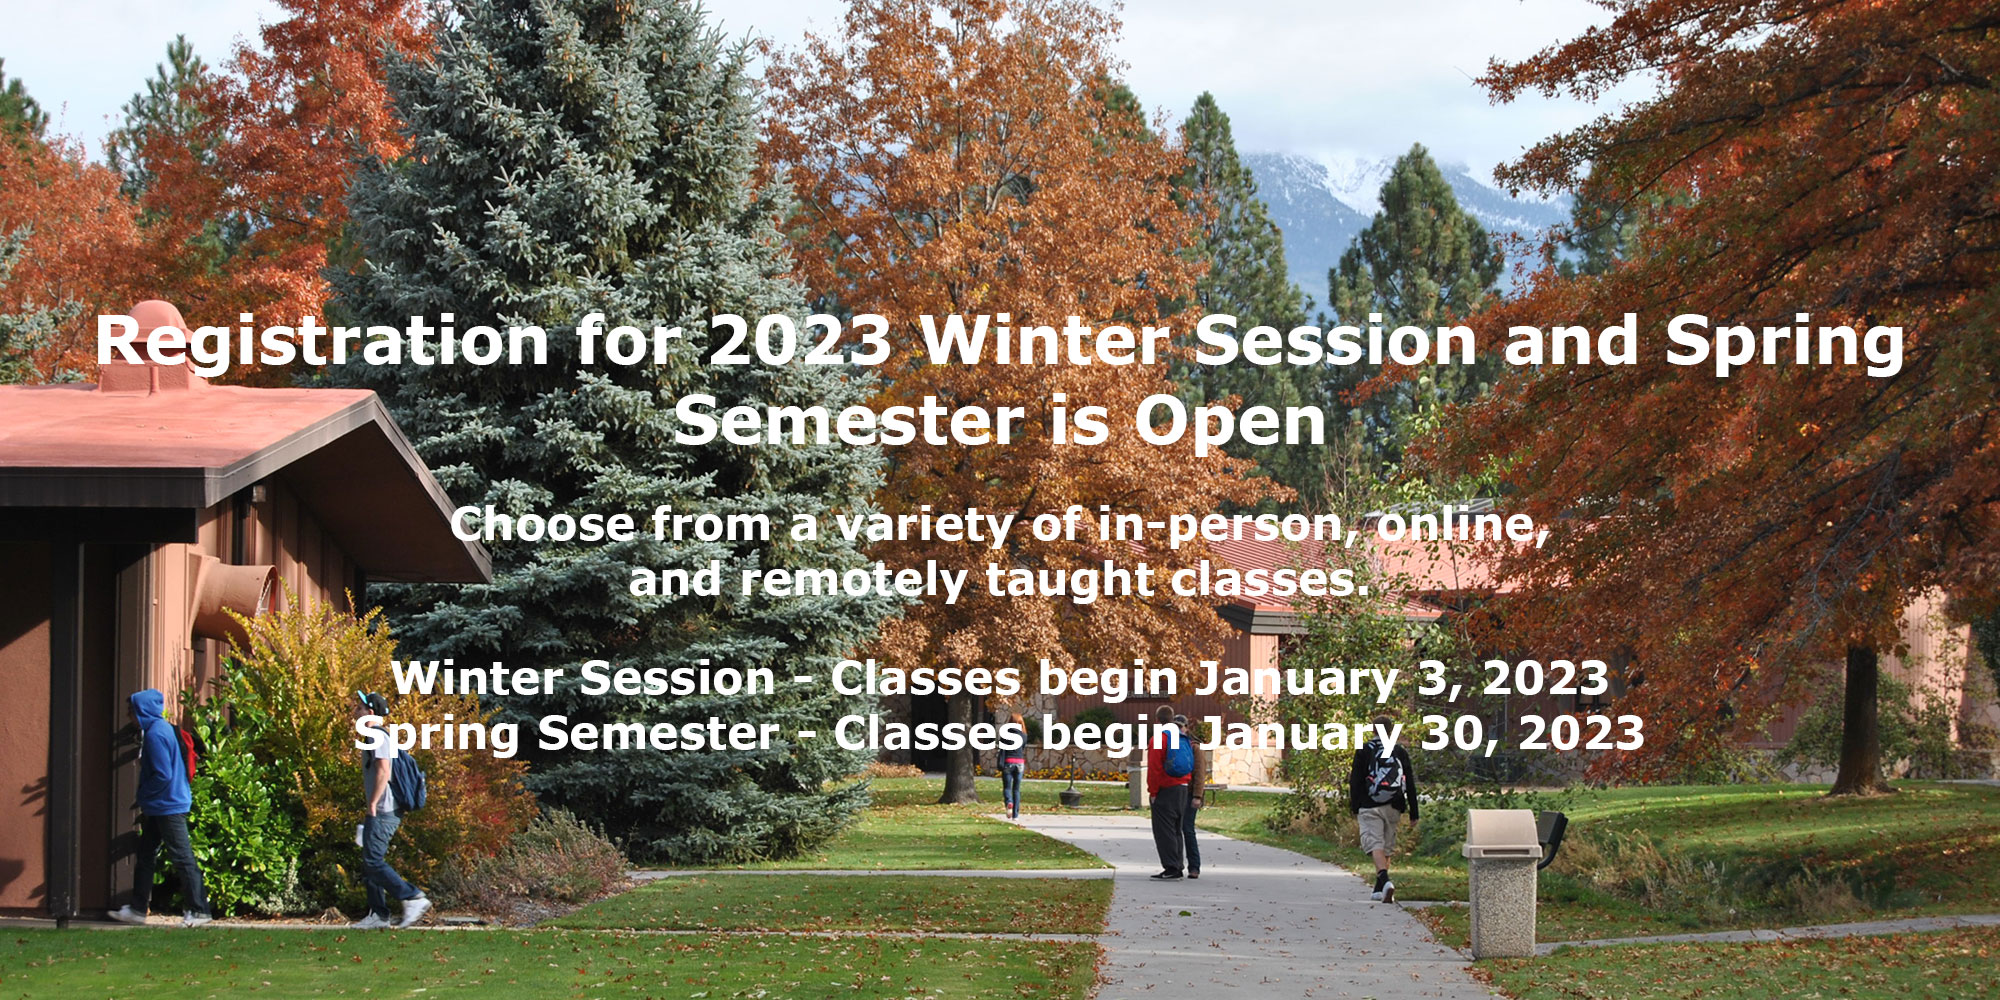 Registratio for 2023 Winter Session and Spring Semester is Open. Choose from a variety of in-person, online, and remotely taught classes. Winter Session - Classes begin January 3, 2023. Spring Semester - Classes begin January 30, 2023